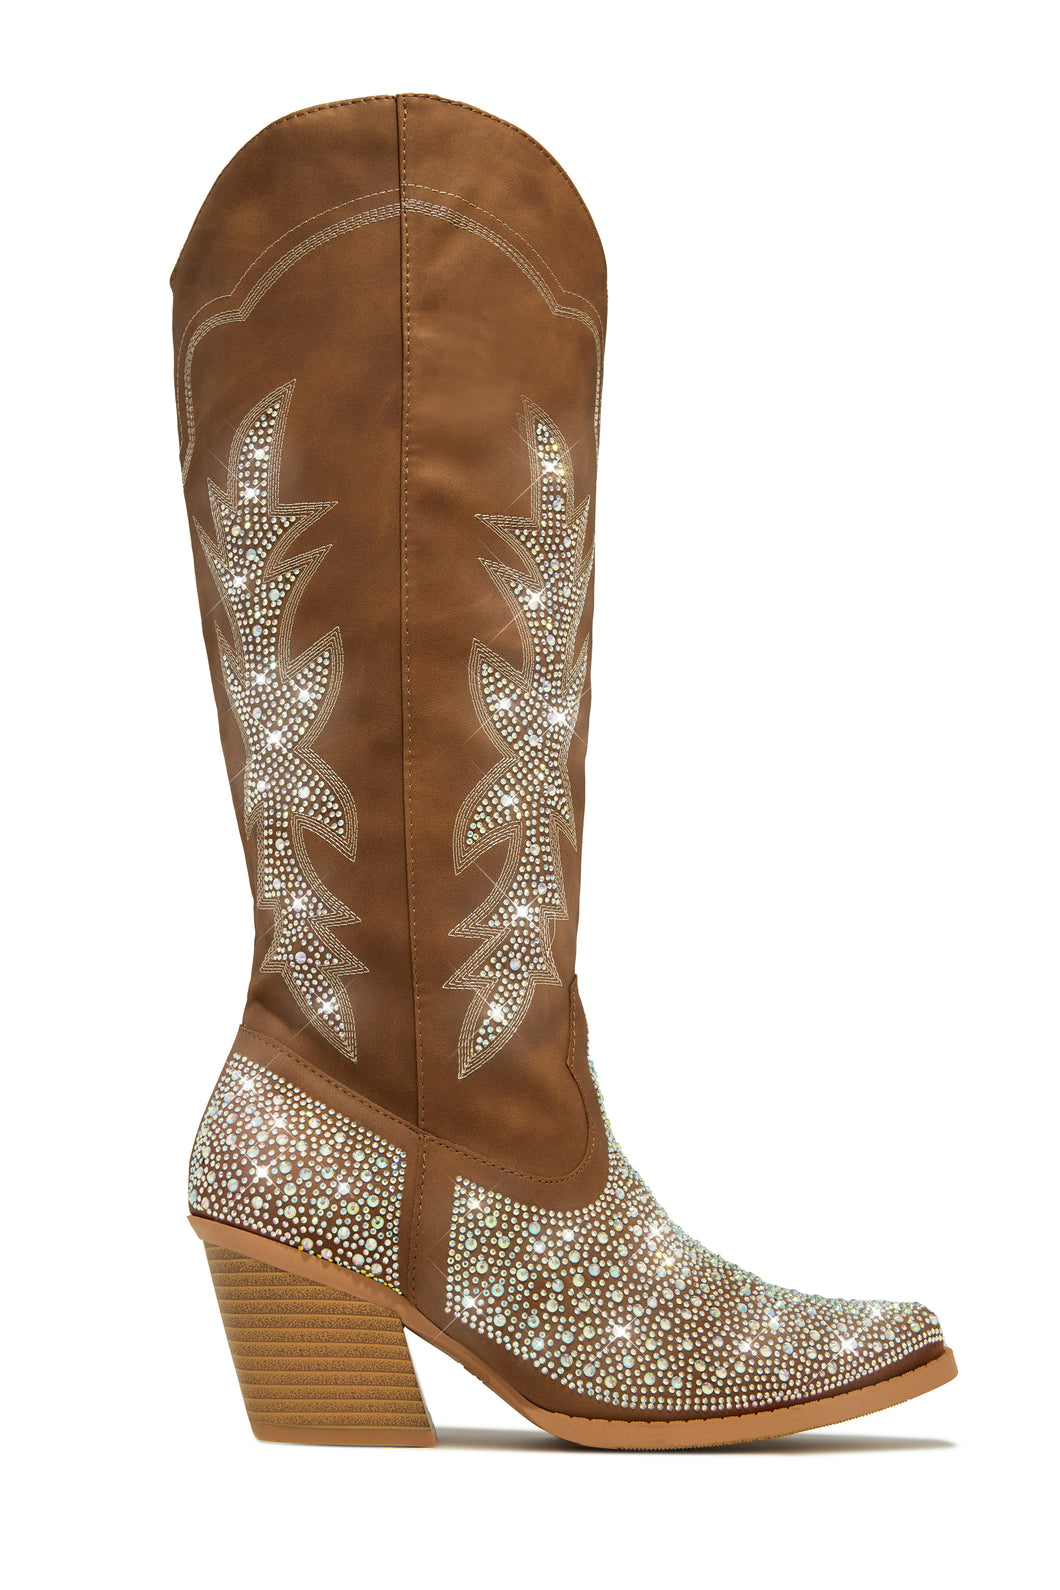 Tan Embellished Cowgirl Boots